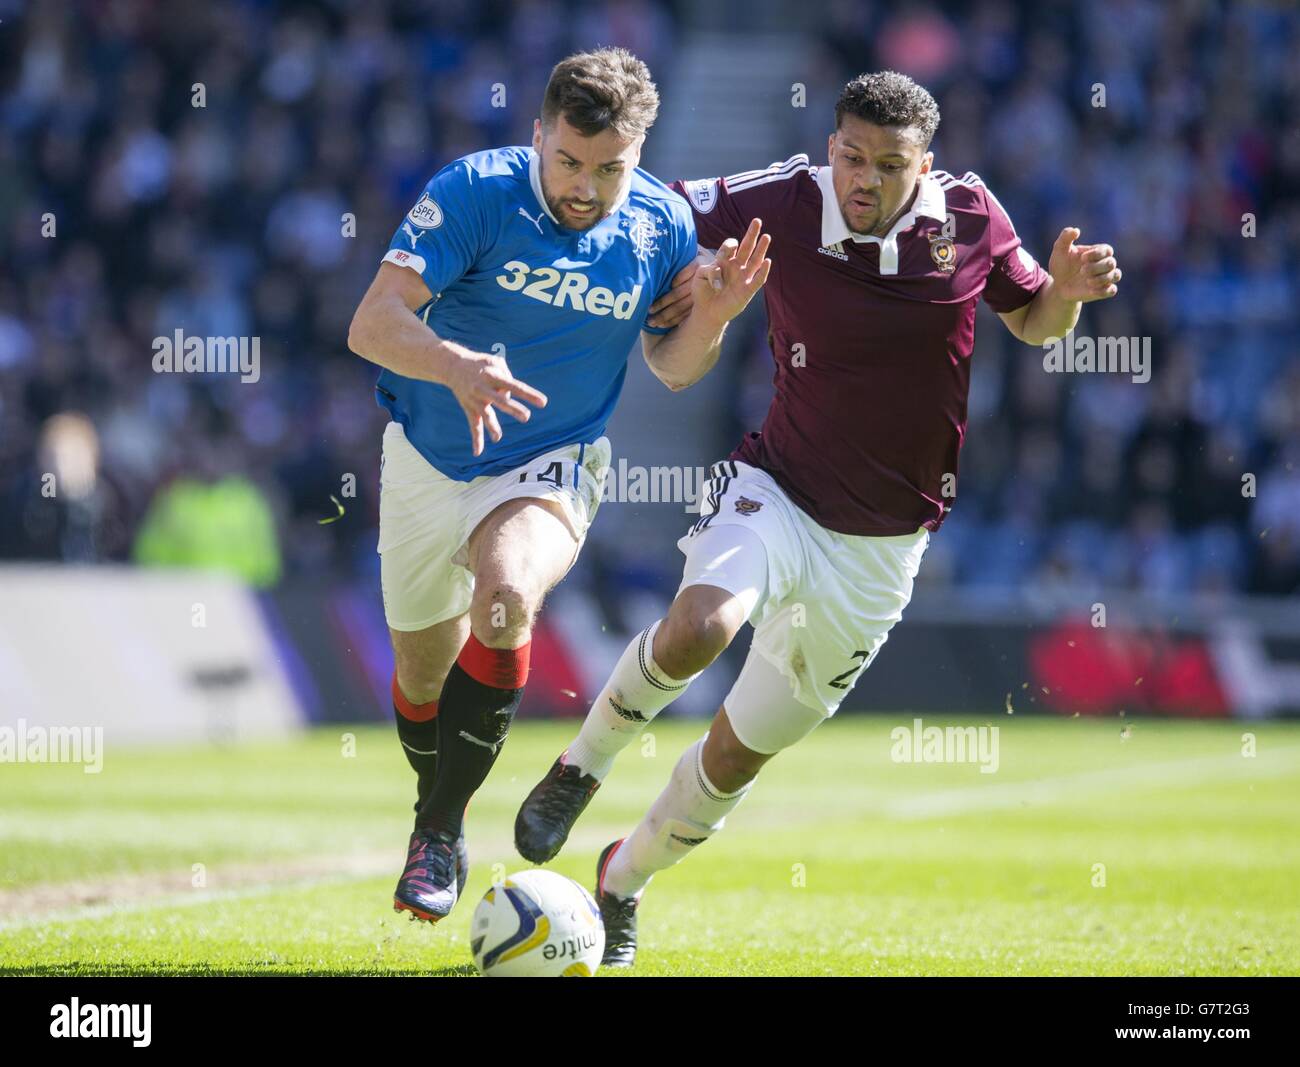 Rangers' Darren McGregor (left) and Herats' Osman Sow (right) during the Scottish Championship match at Ibrox Stadium, Glasgow. Stock Photo